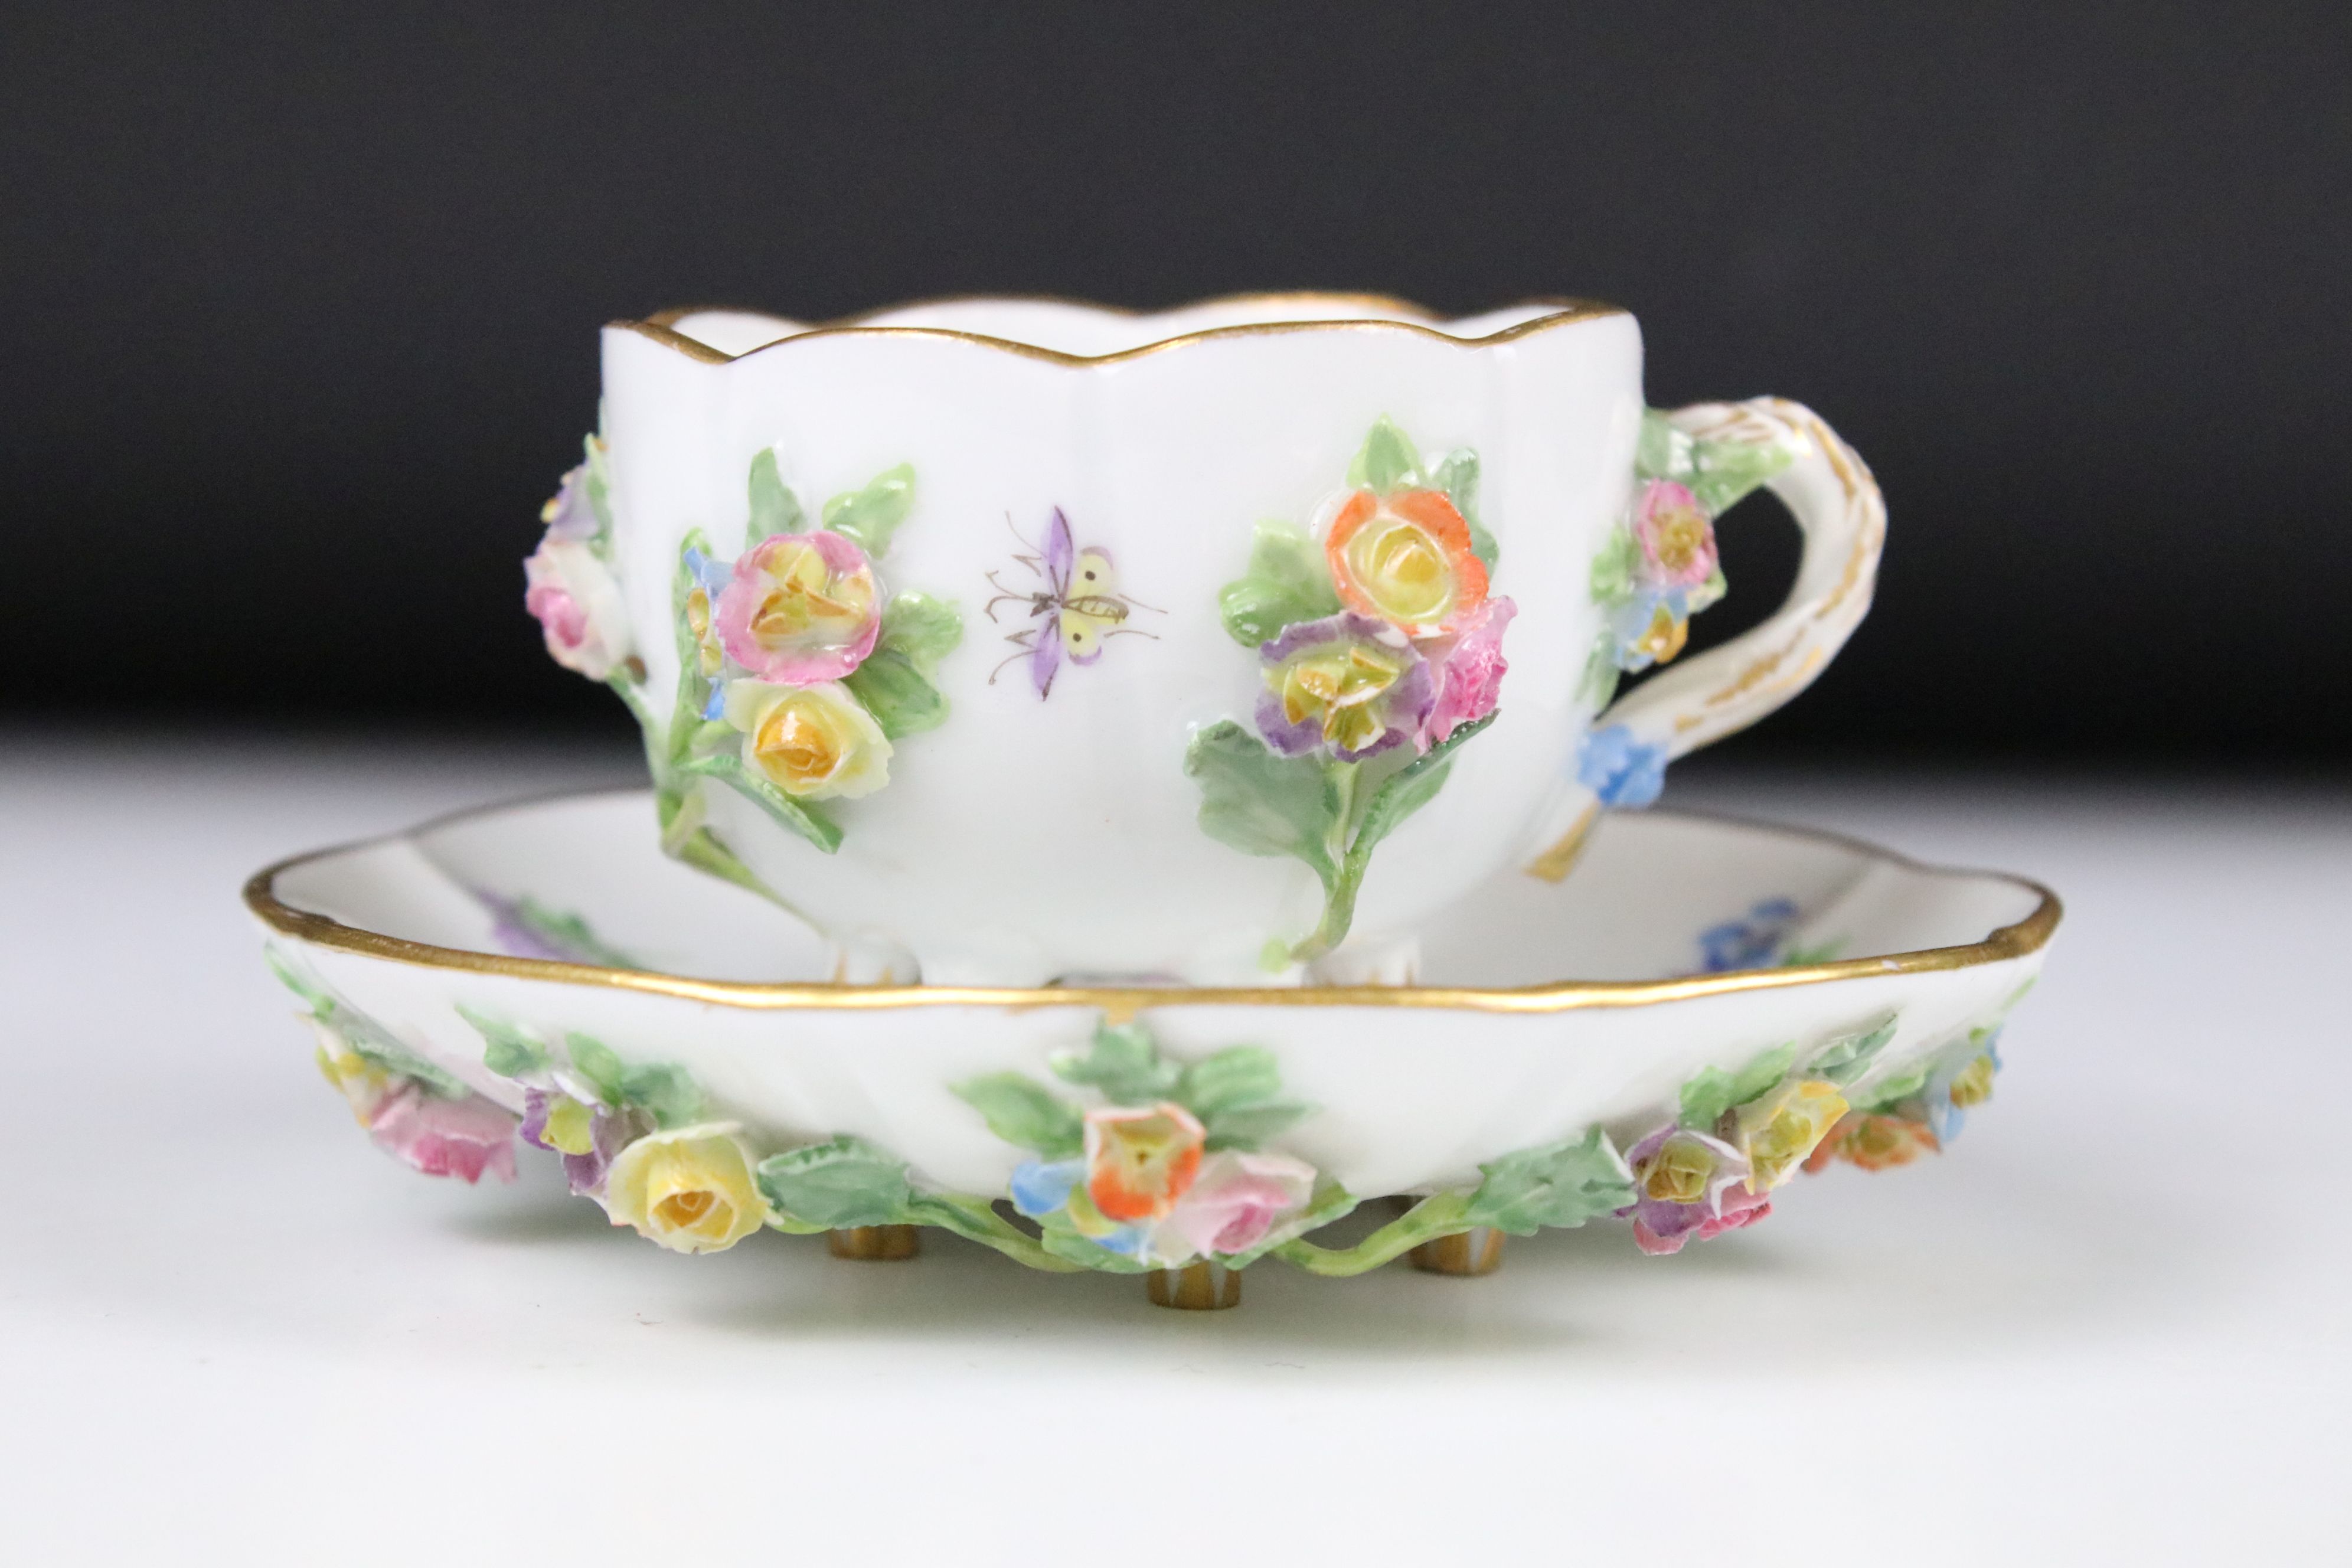 Meissen floral encrusted cup and saucer, decorated with insects and flowers